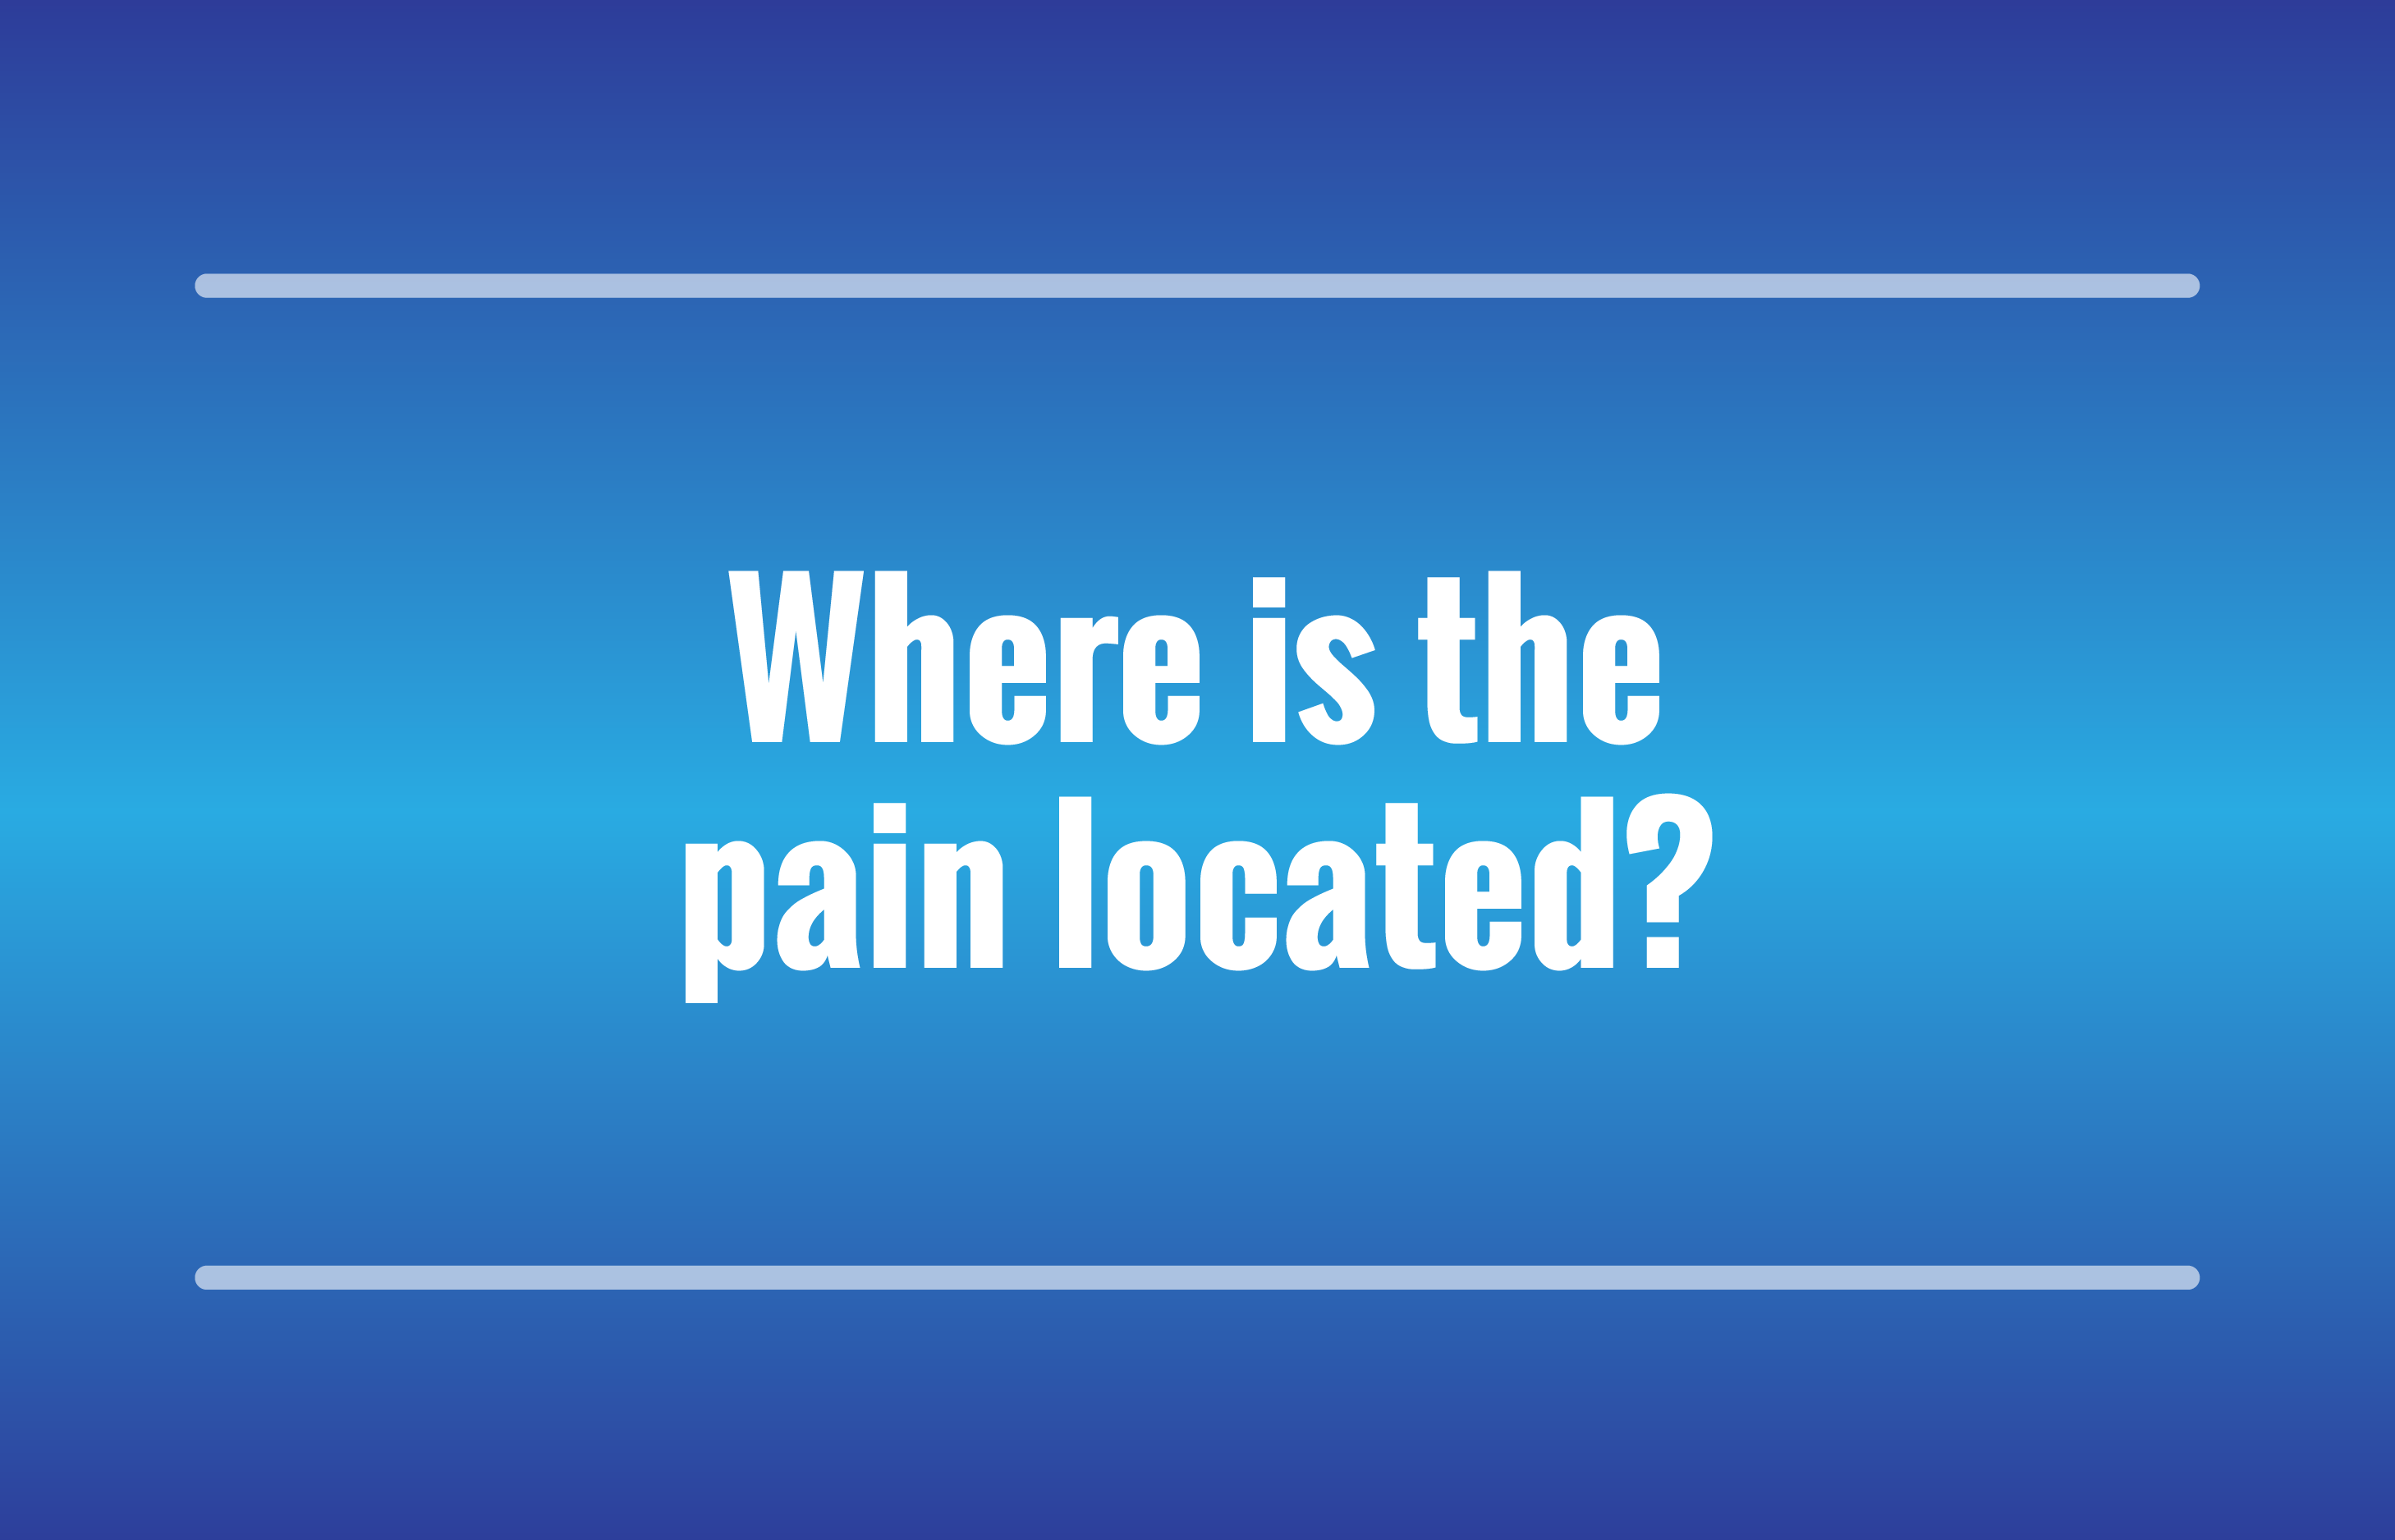 Where is the pain located?